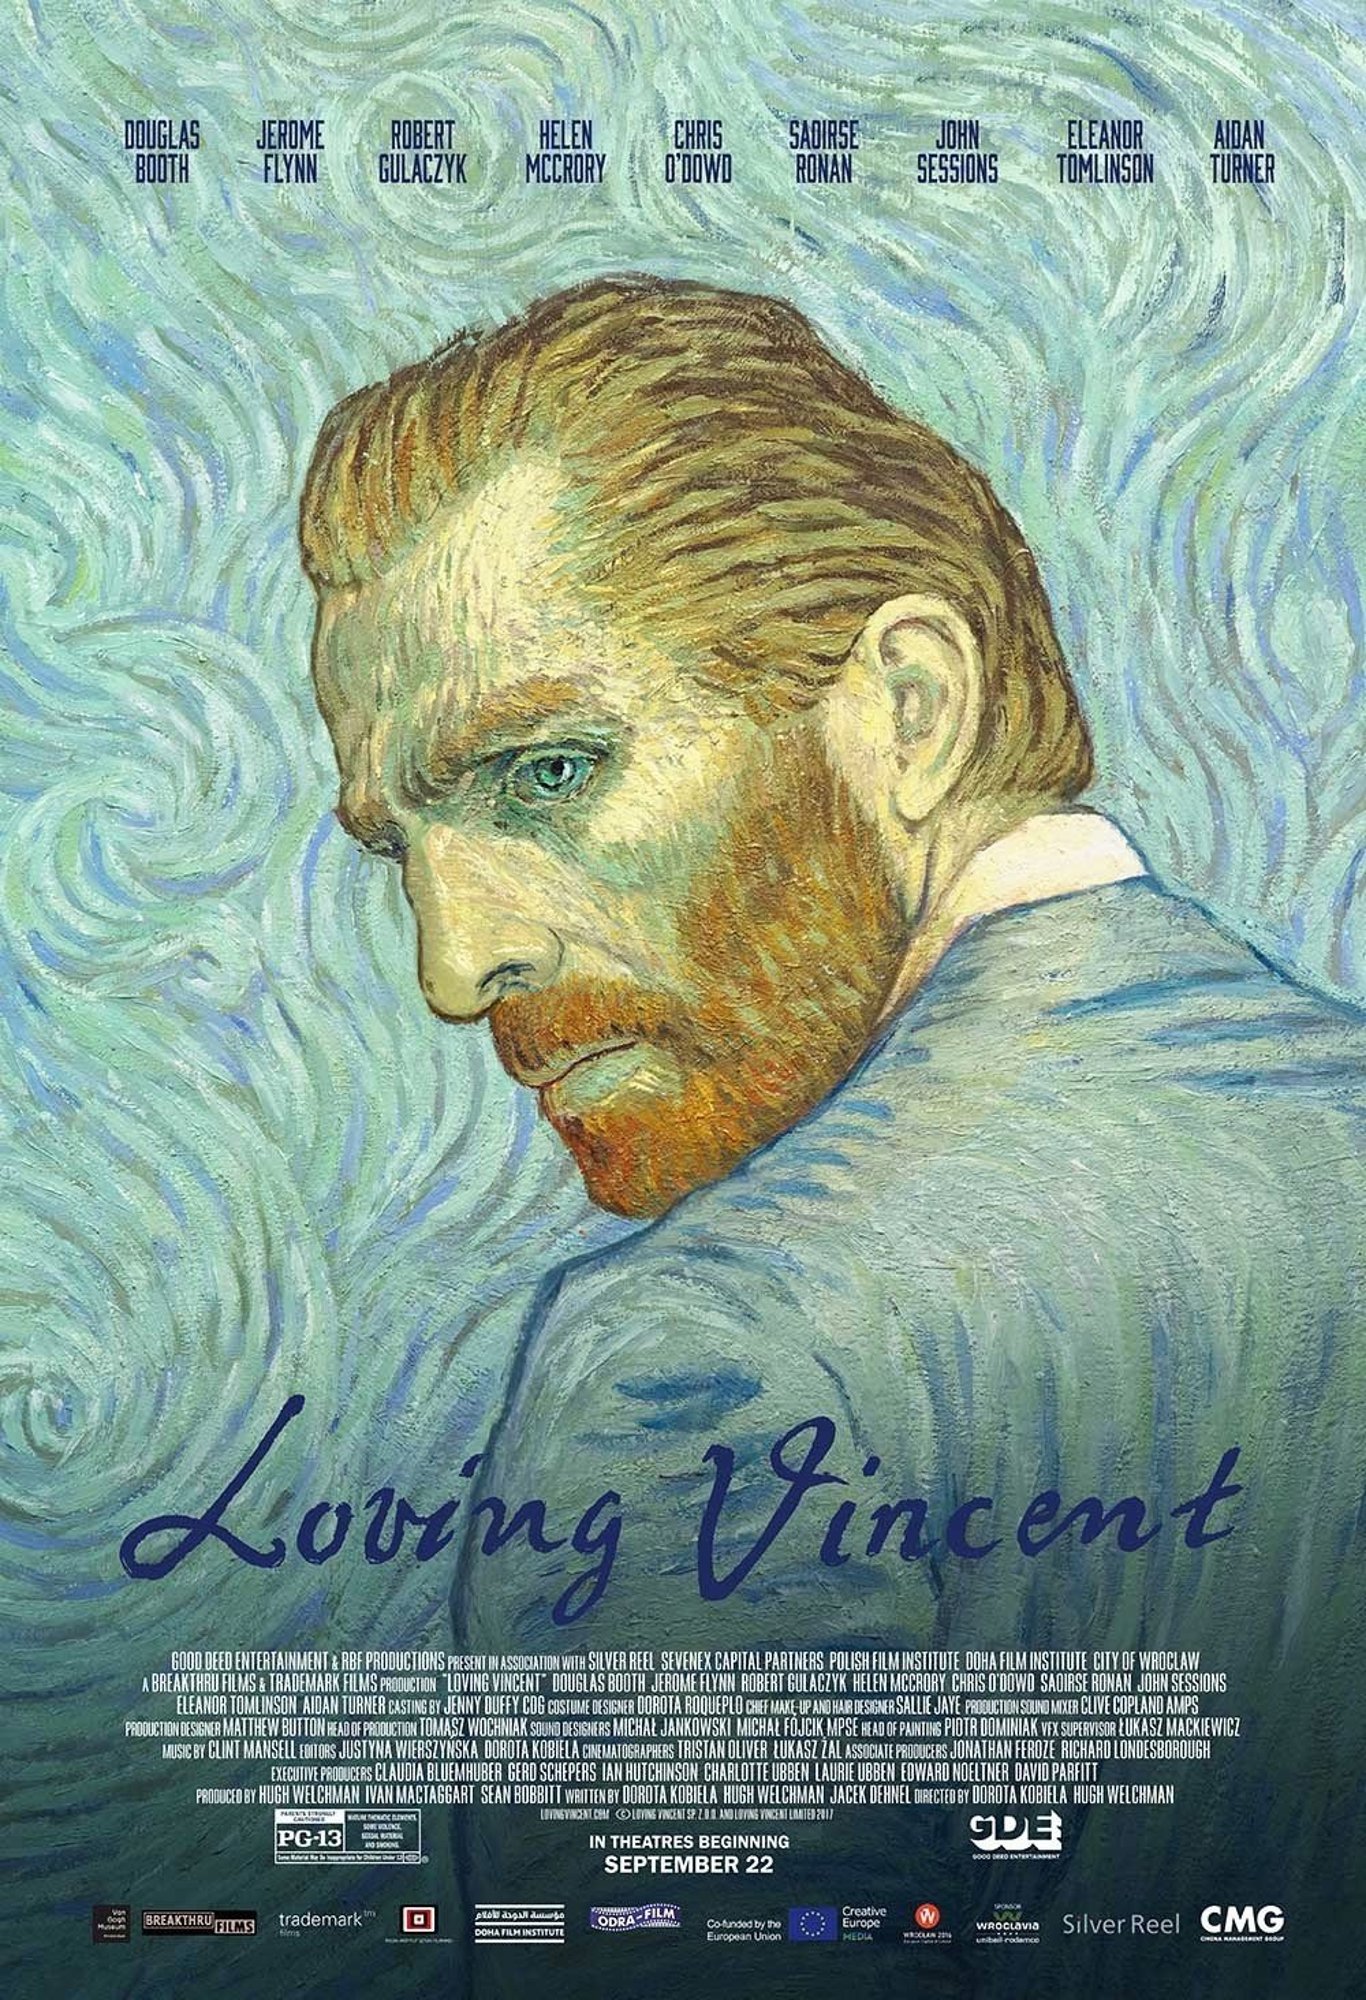 Poster of Good Deed Entertainment's Loving Vincent (2017)